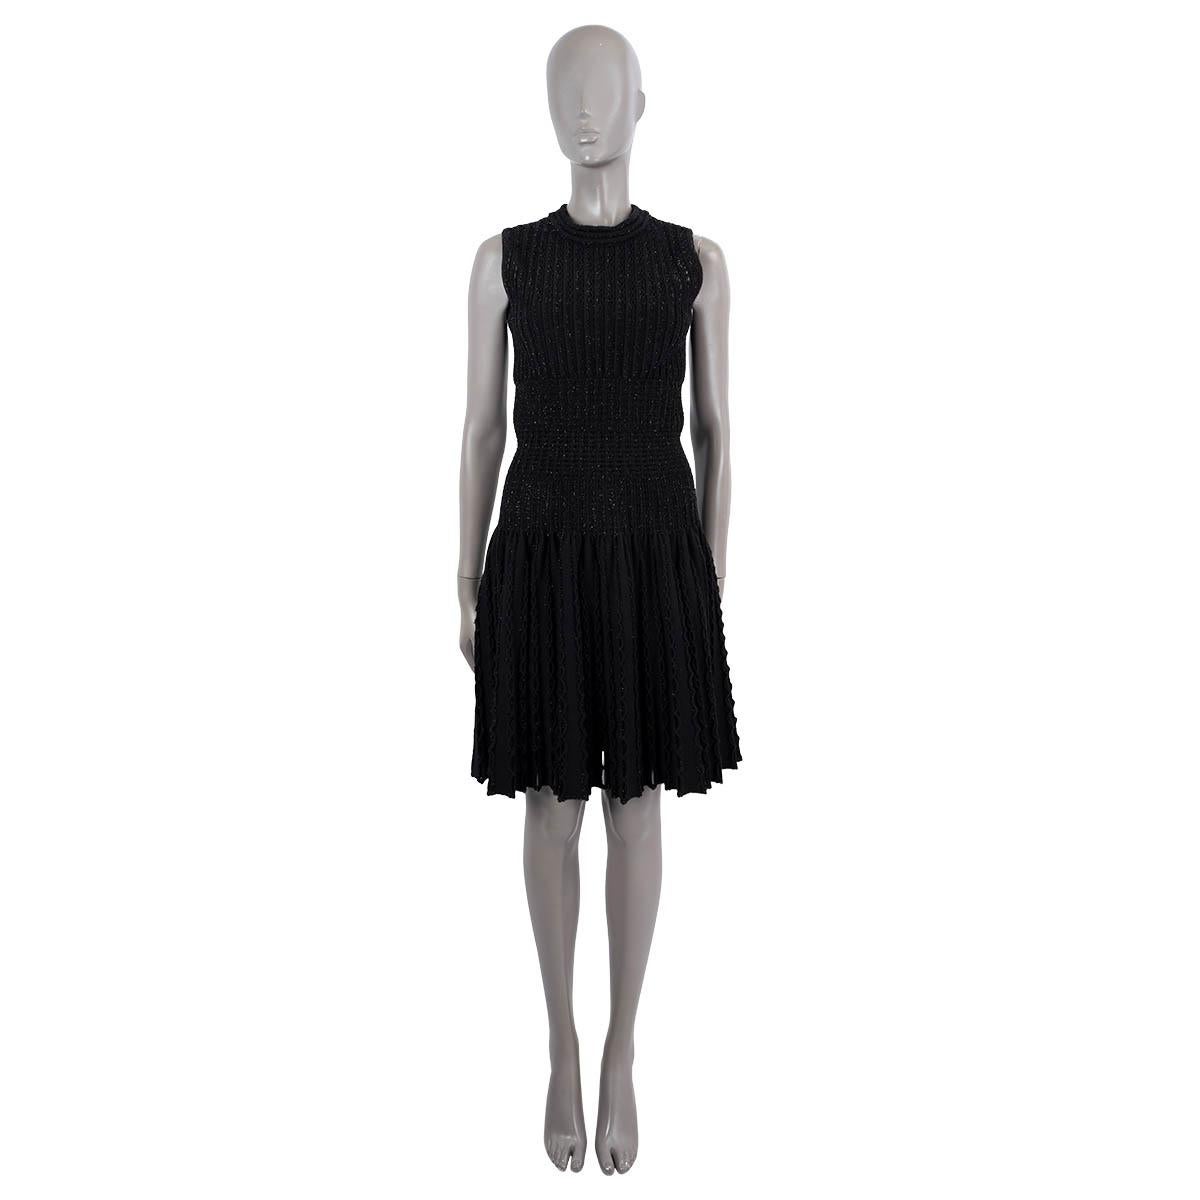 100% authentic Alaïa sleeveless flared cut-out dress in black fleece wool (60%), polyamide (20%), viscose (10%) and polyester (10%). The design features lurex threads and cut-out details on the top and skirt part.  Unlined. Opens with a concealed